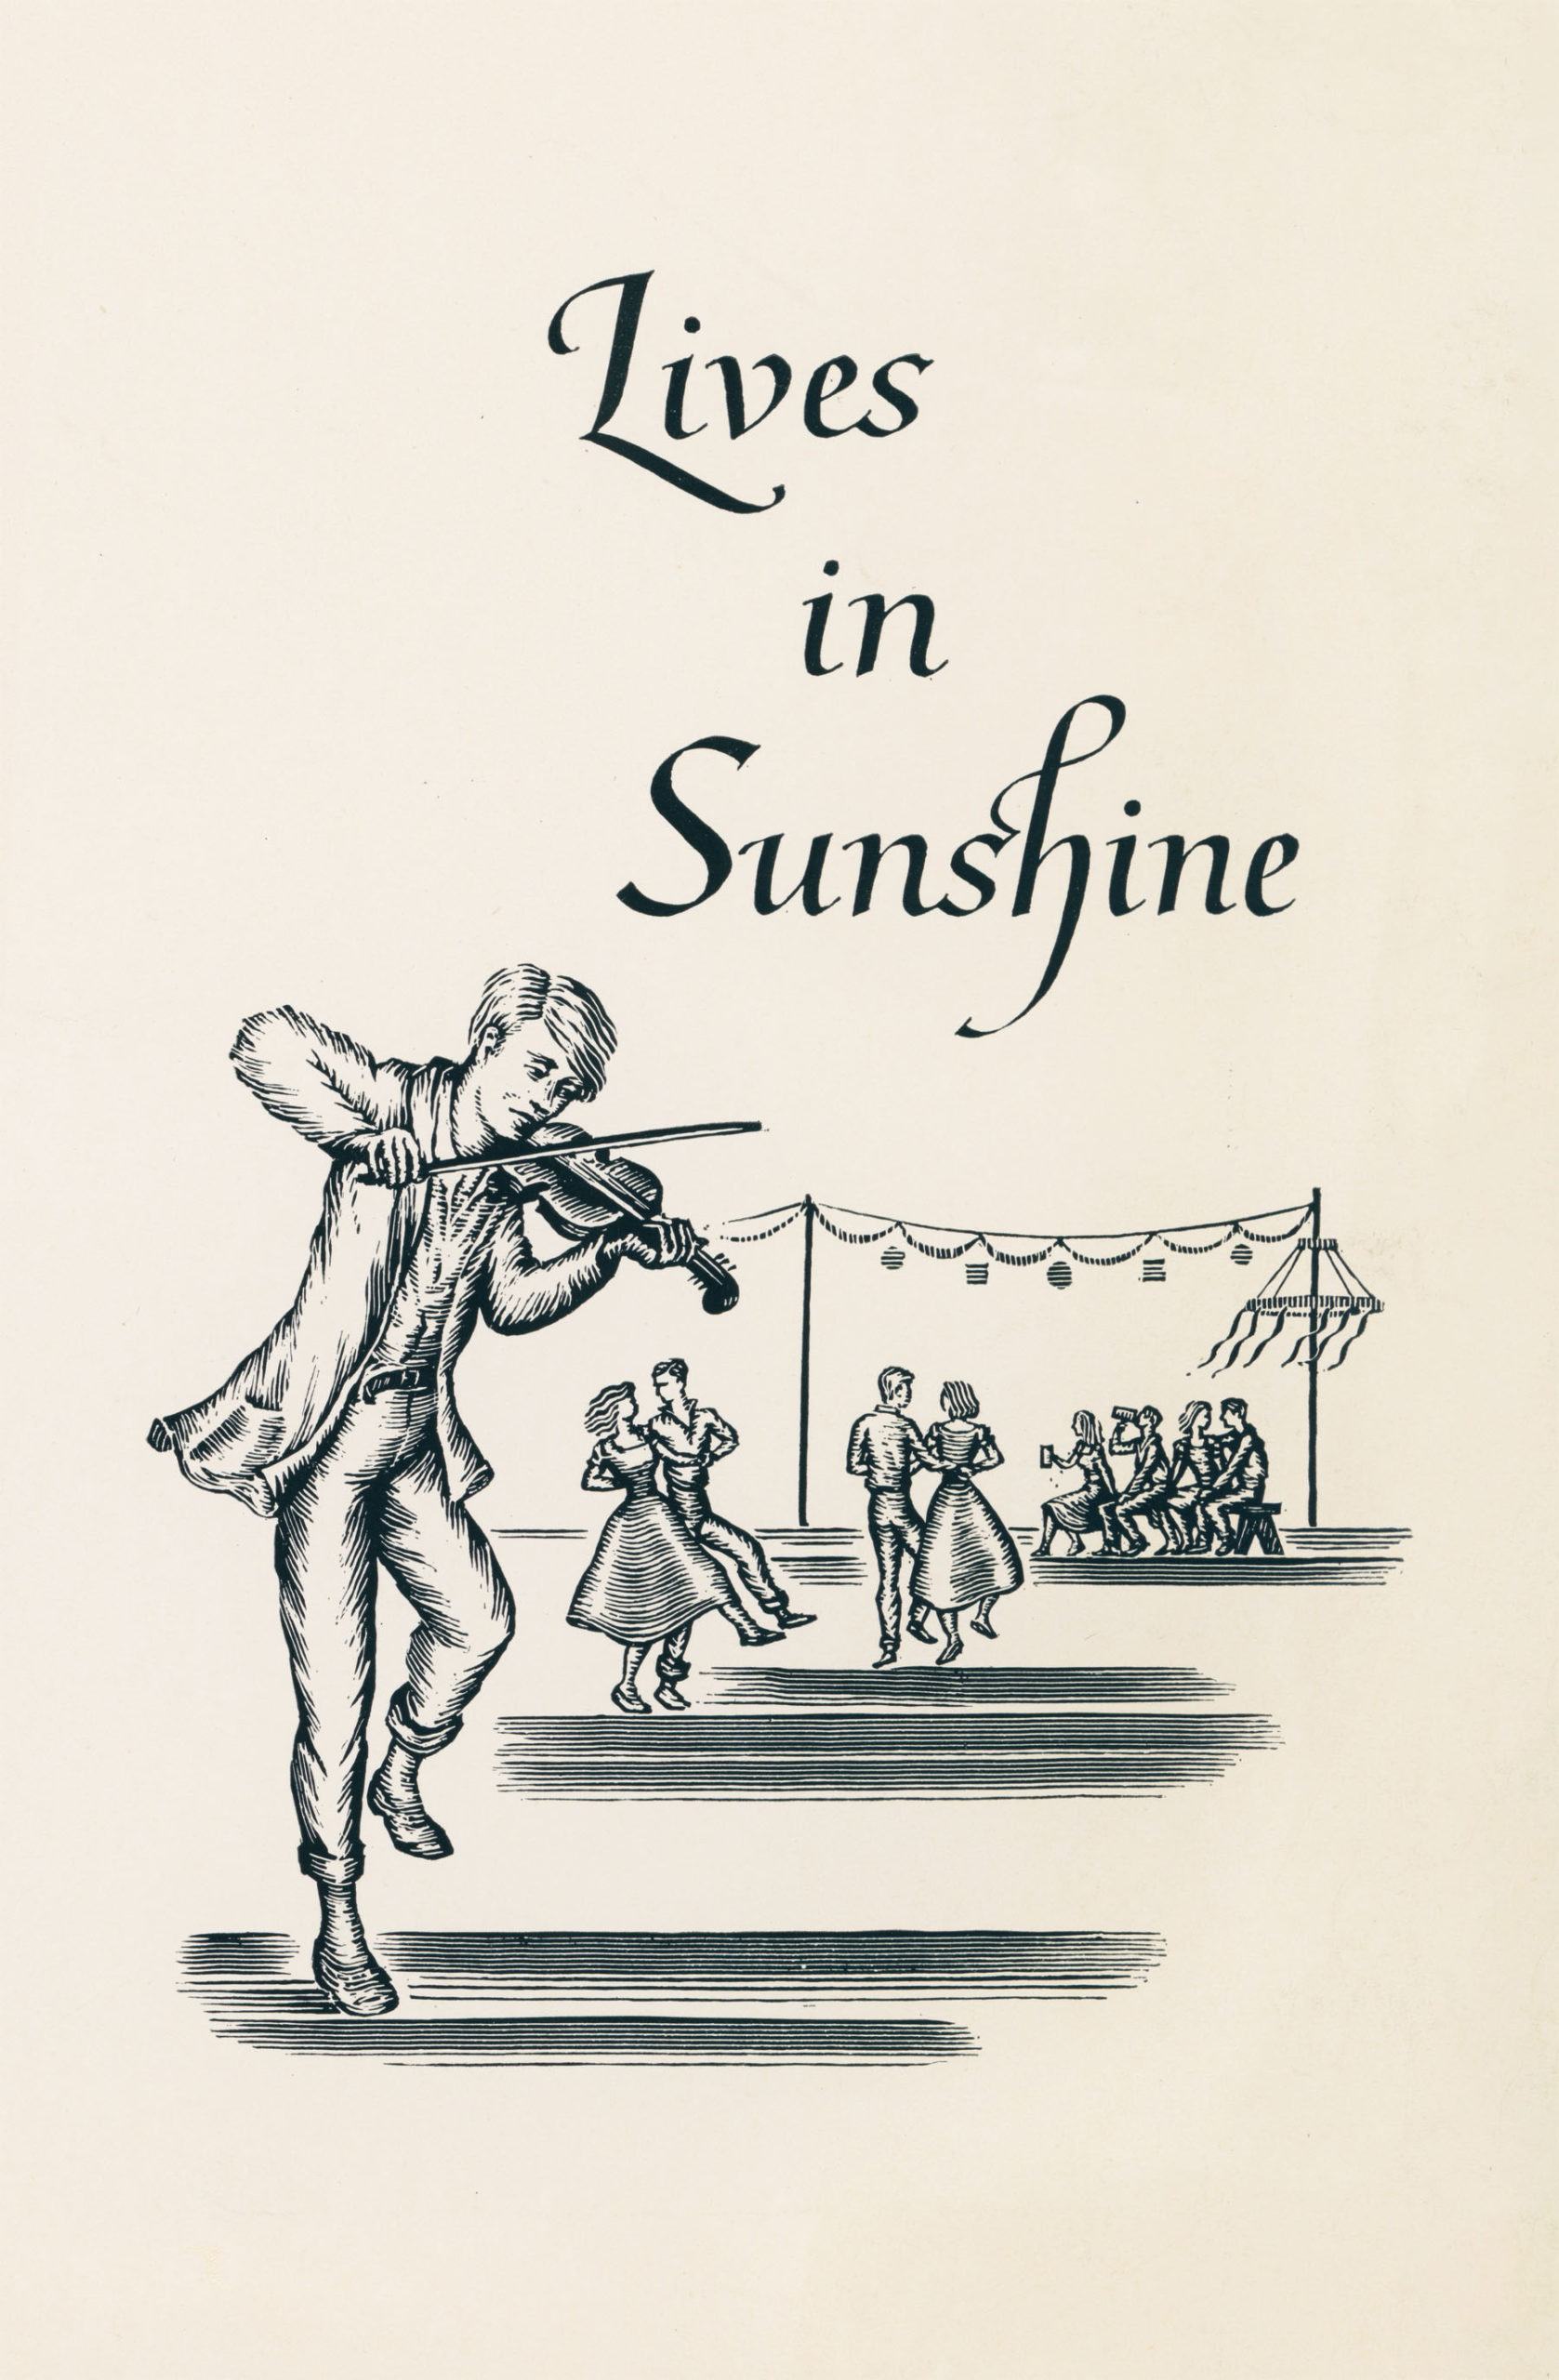 100 Poems About People: Lives in Sunshine